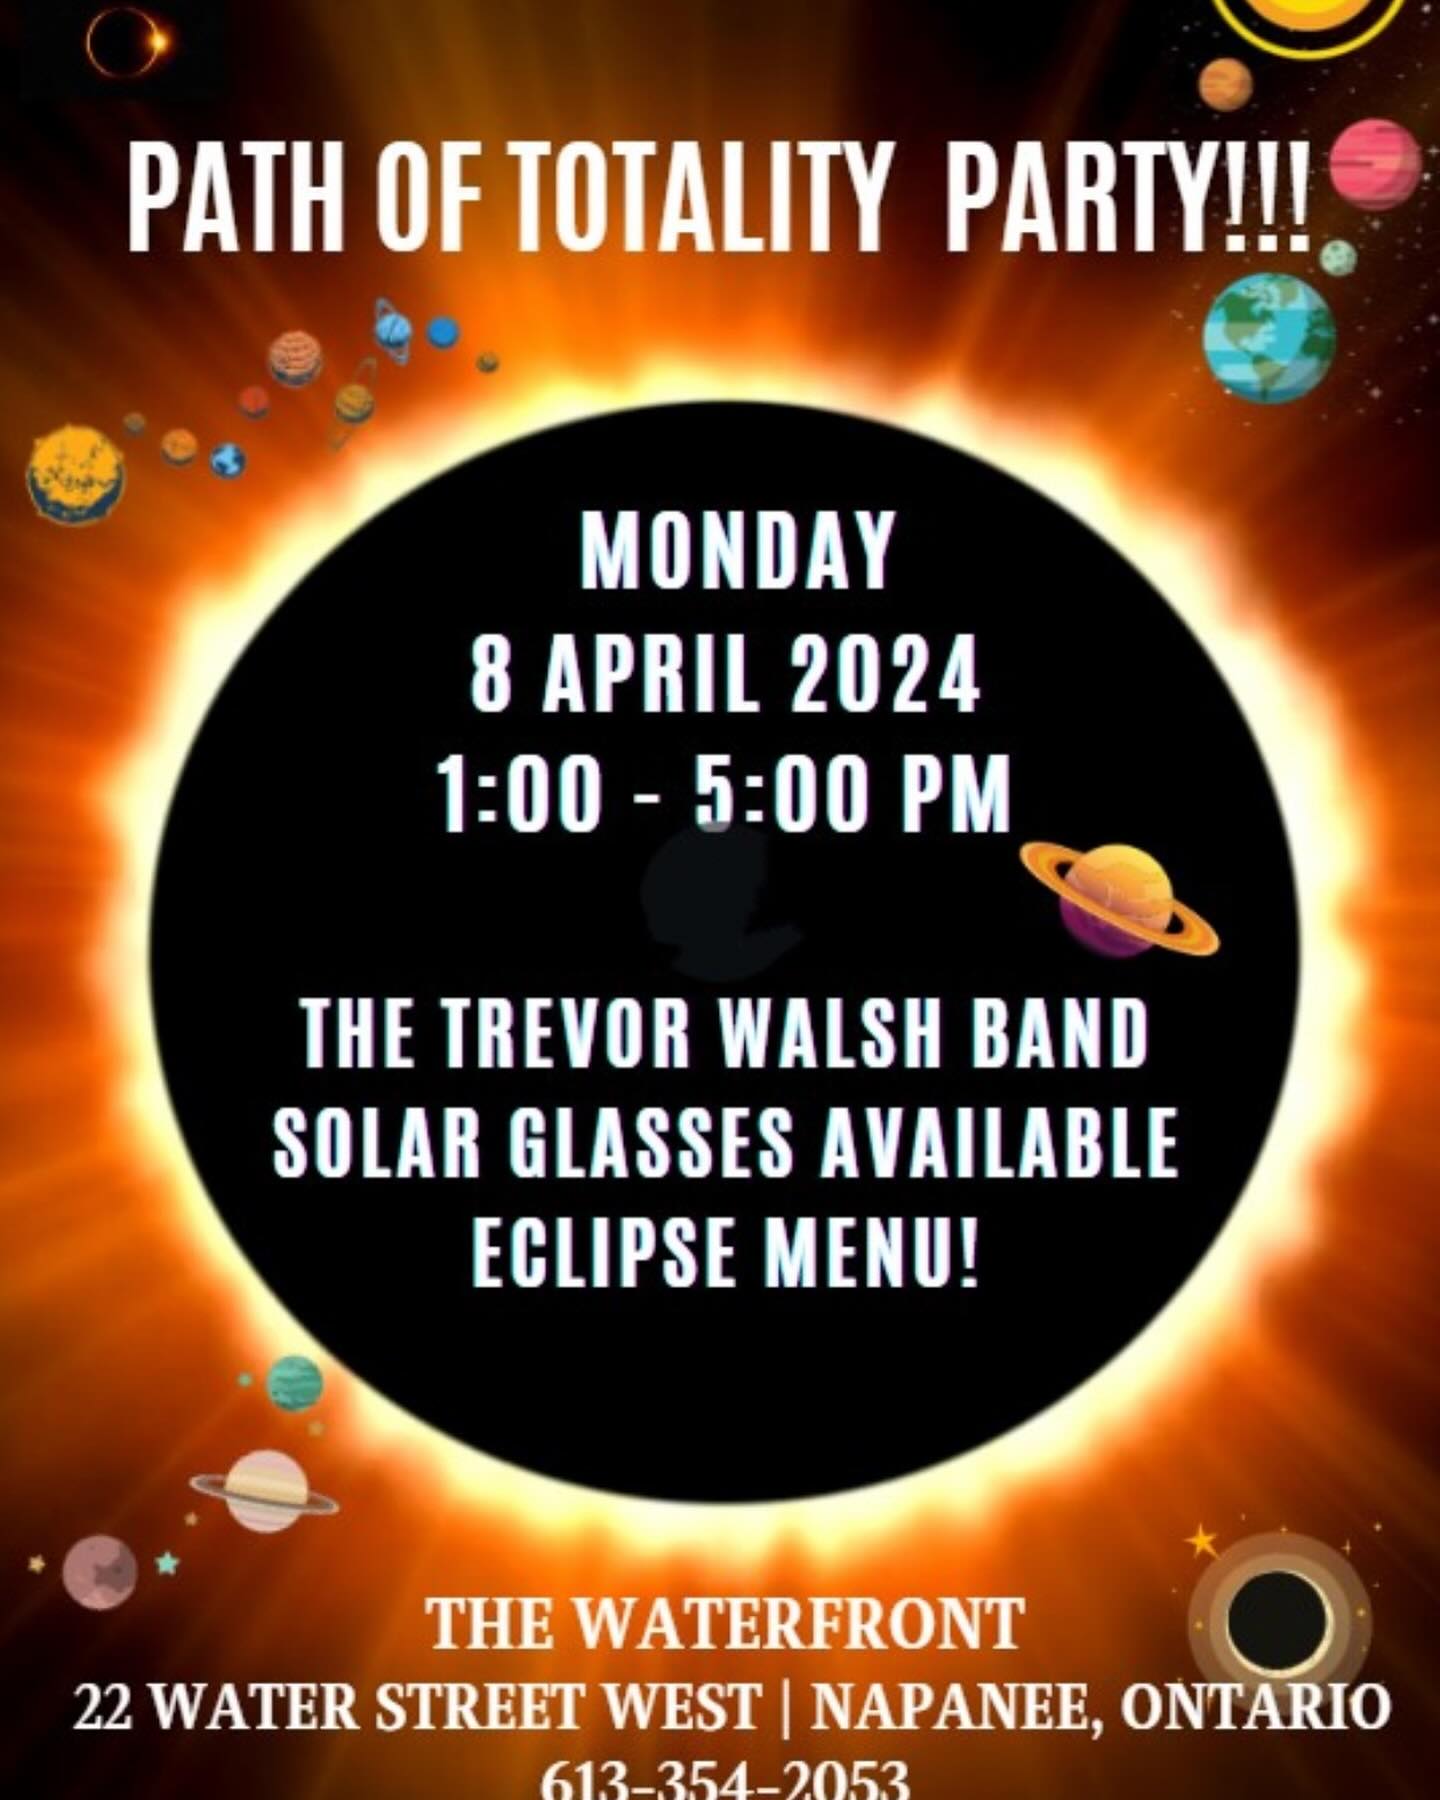 Poster for event with photo of an eclipse. Titled :"Path of Totality Party"